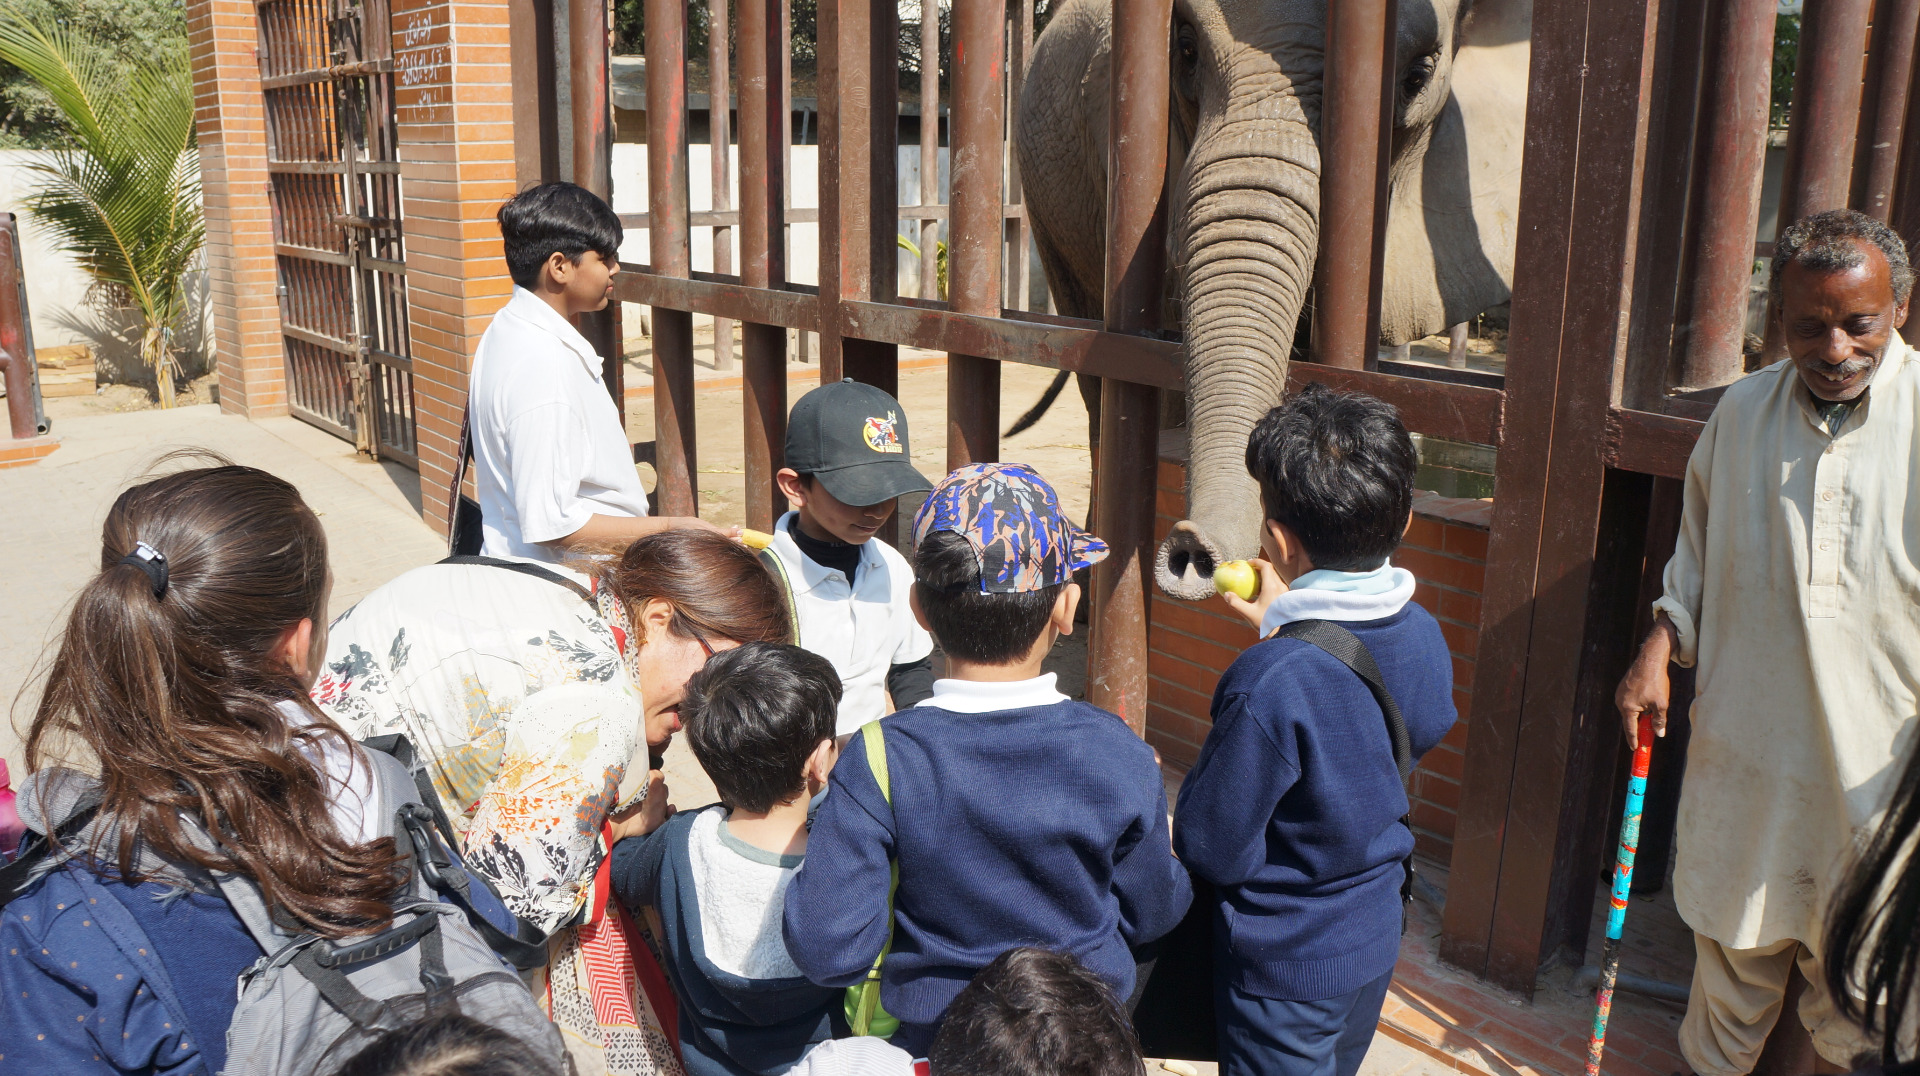 Primary's Trip to the Zoo - Image 2